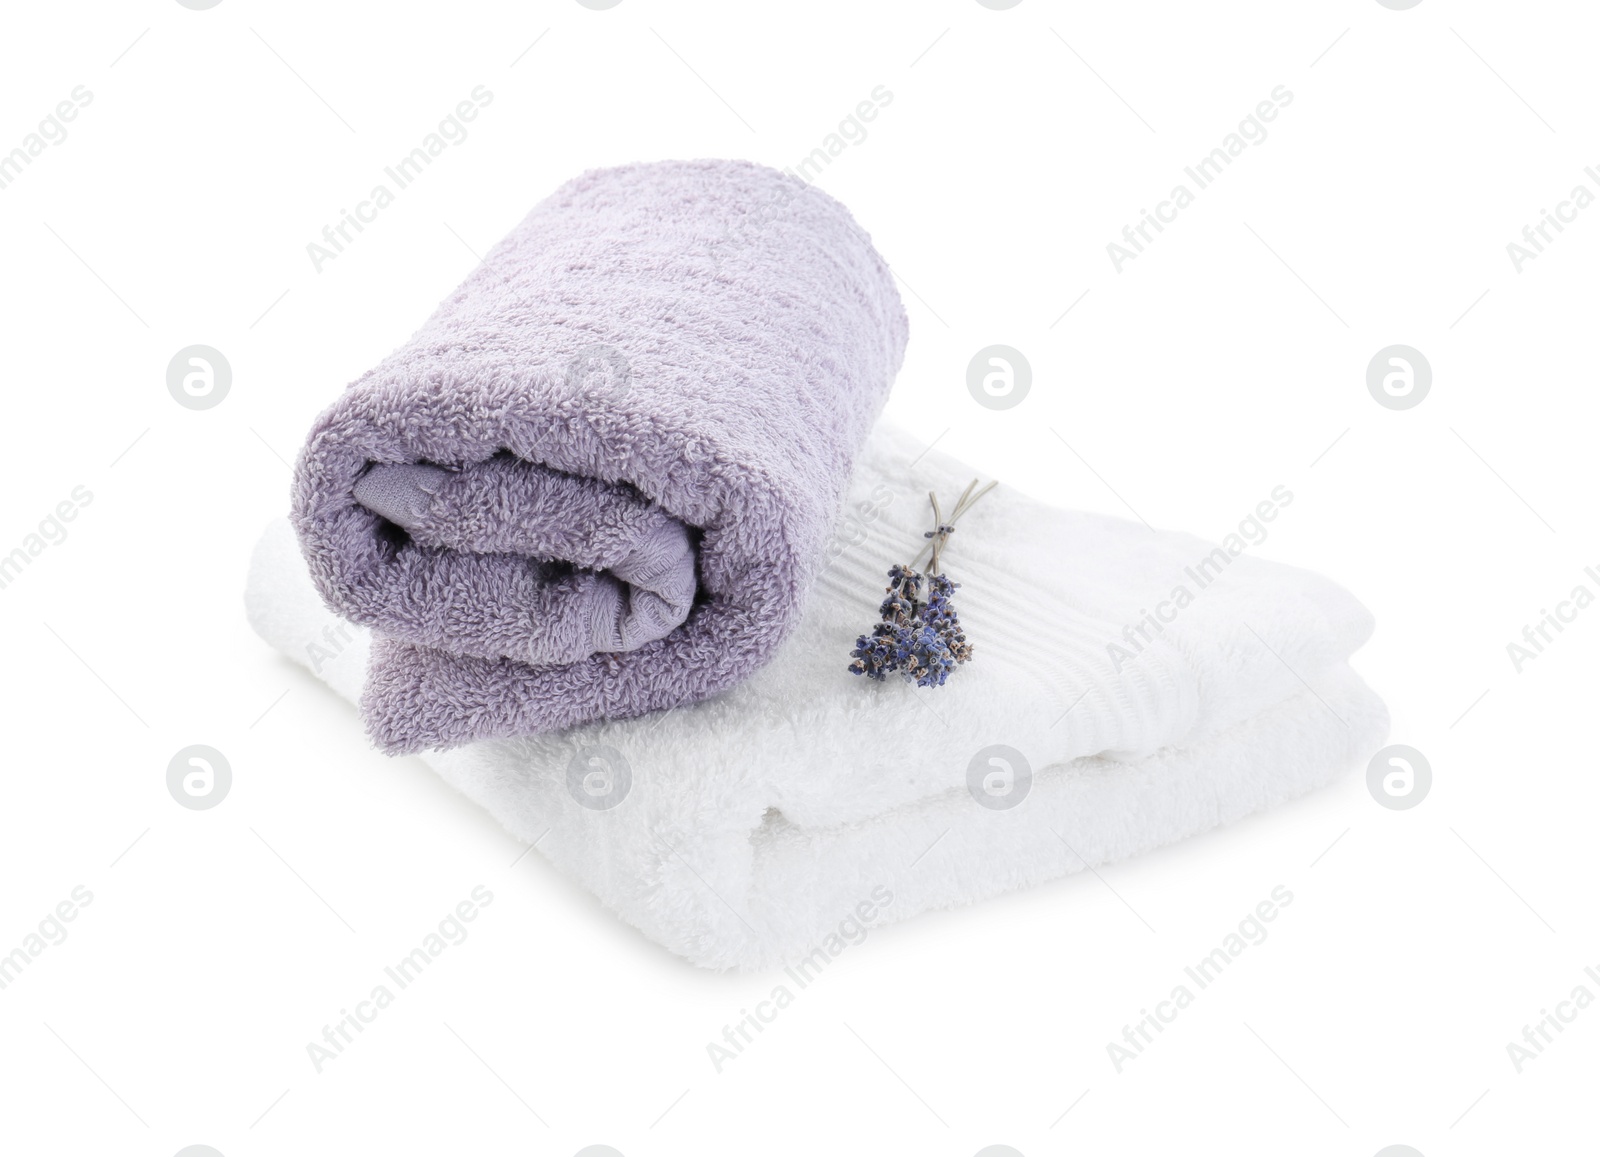 Photo of Terry towels and dry lavender isolated on white